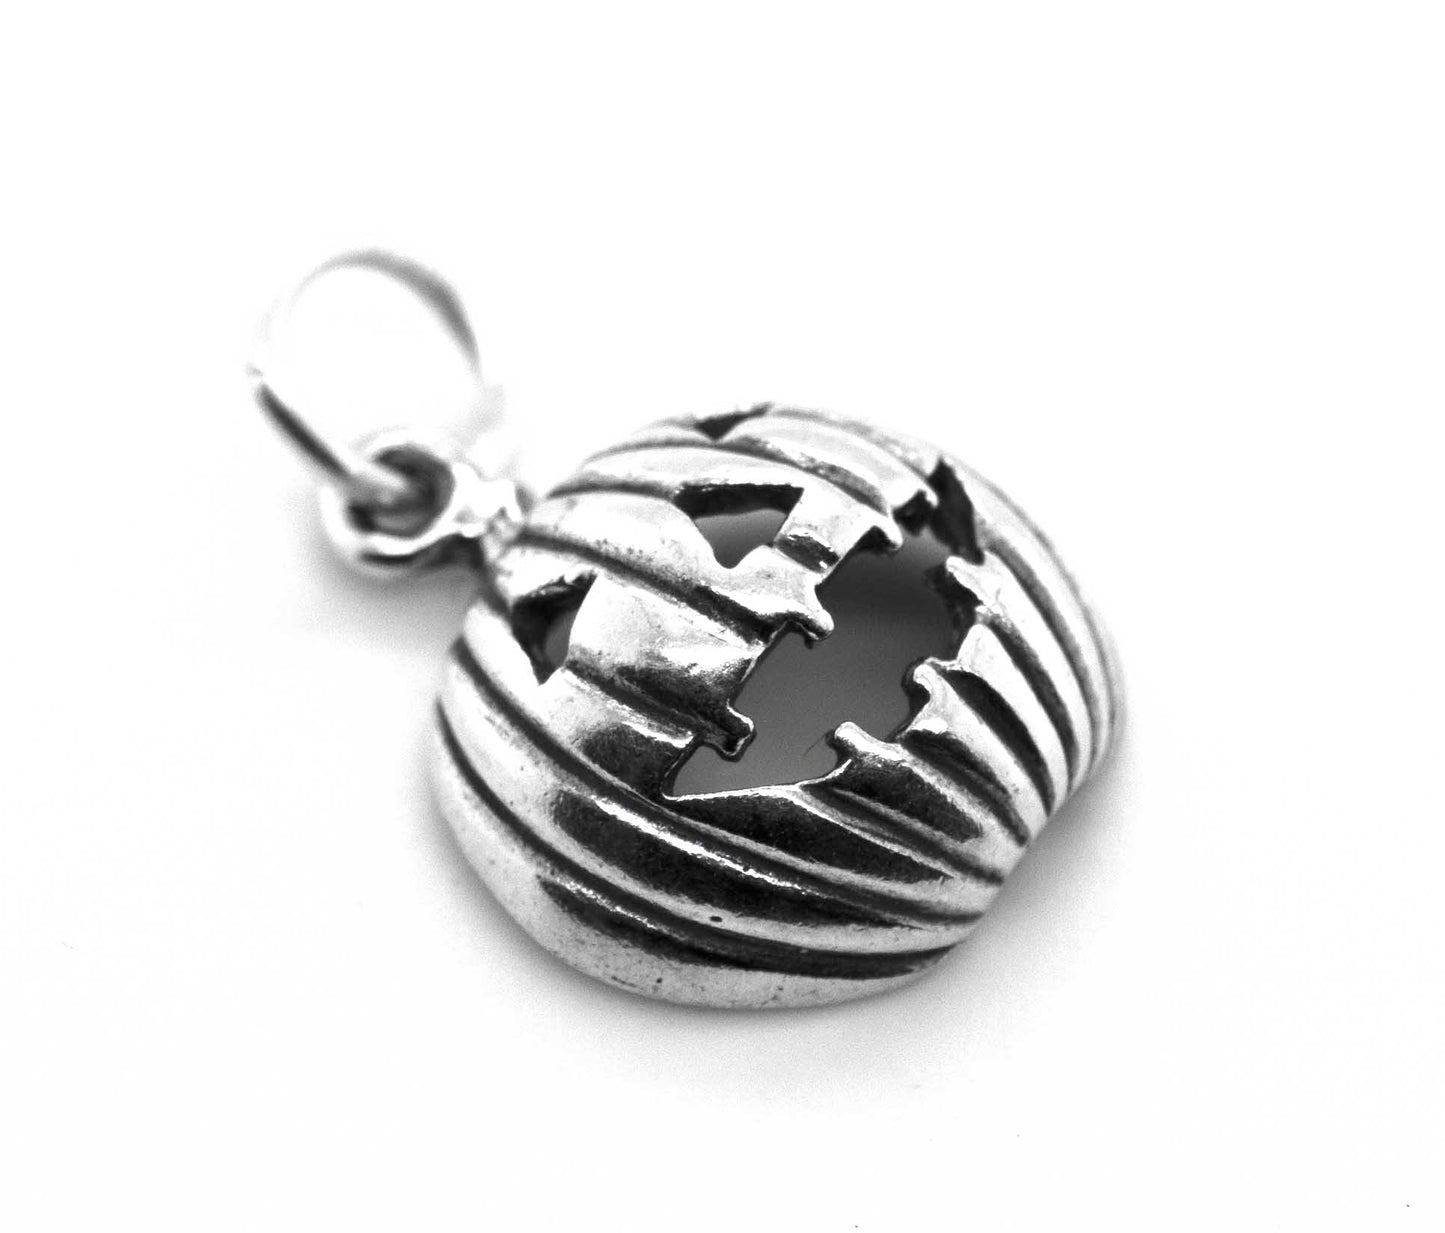 Description: A silver pendant with a Grinning Jack O' Lantern Charm by Super Silver.